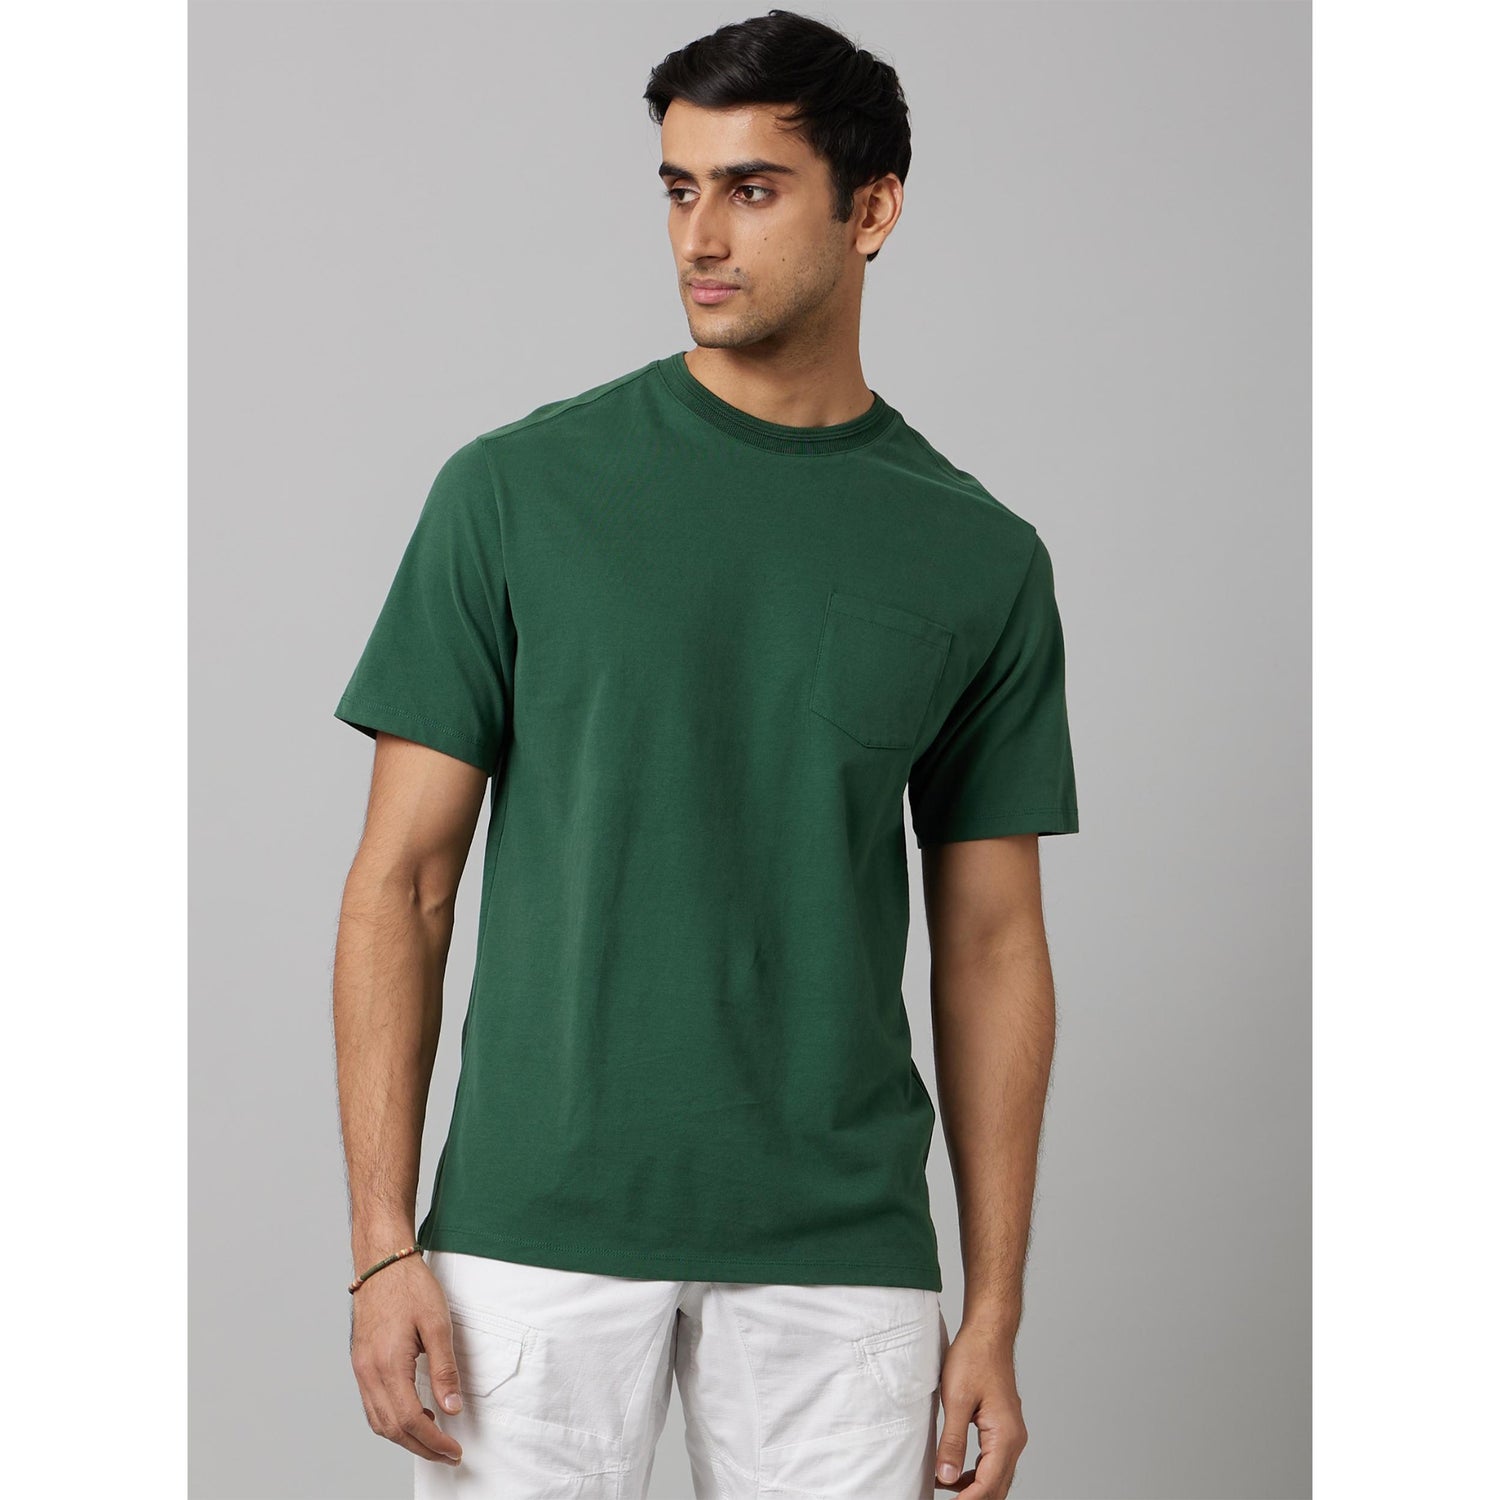 Solid Green Short Sleeves Round Neck Tshirt